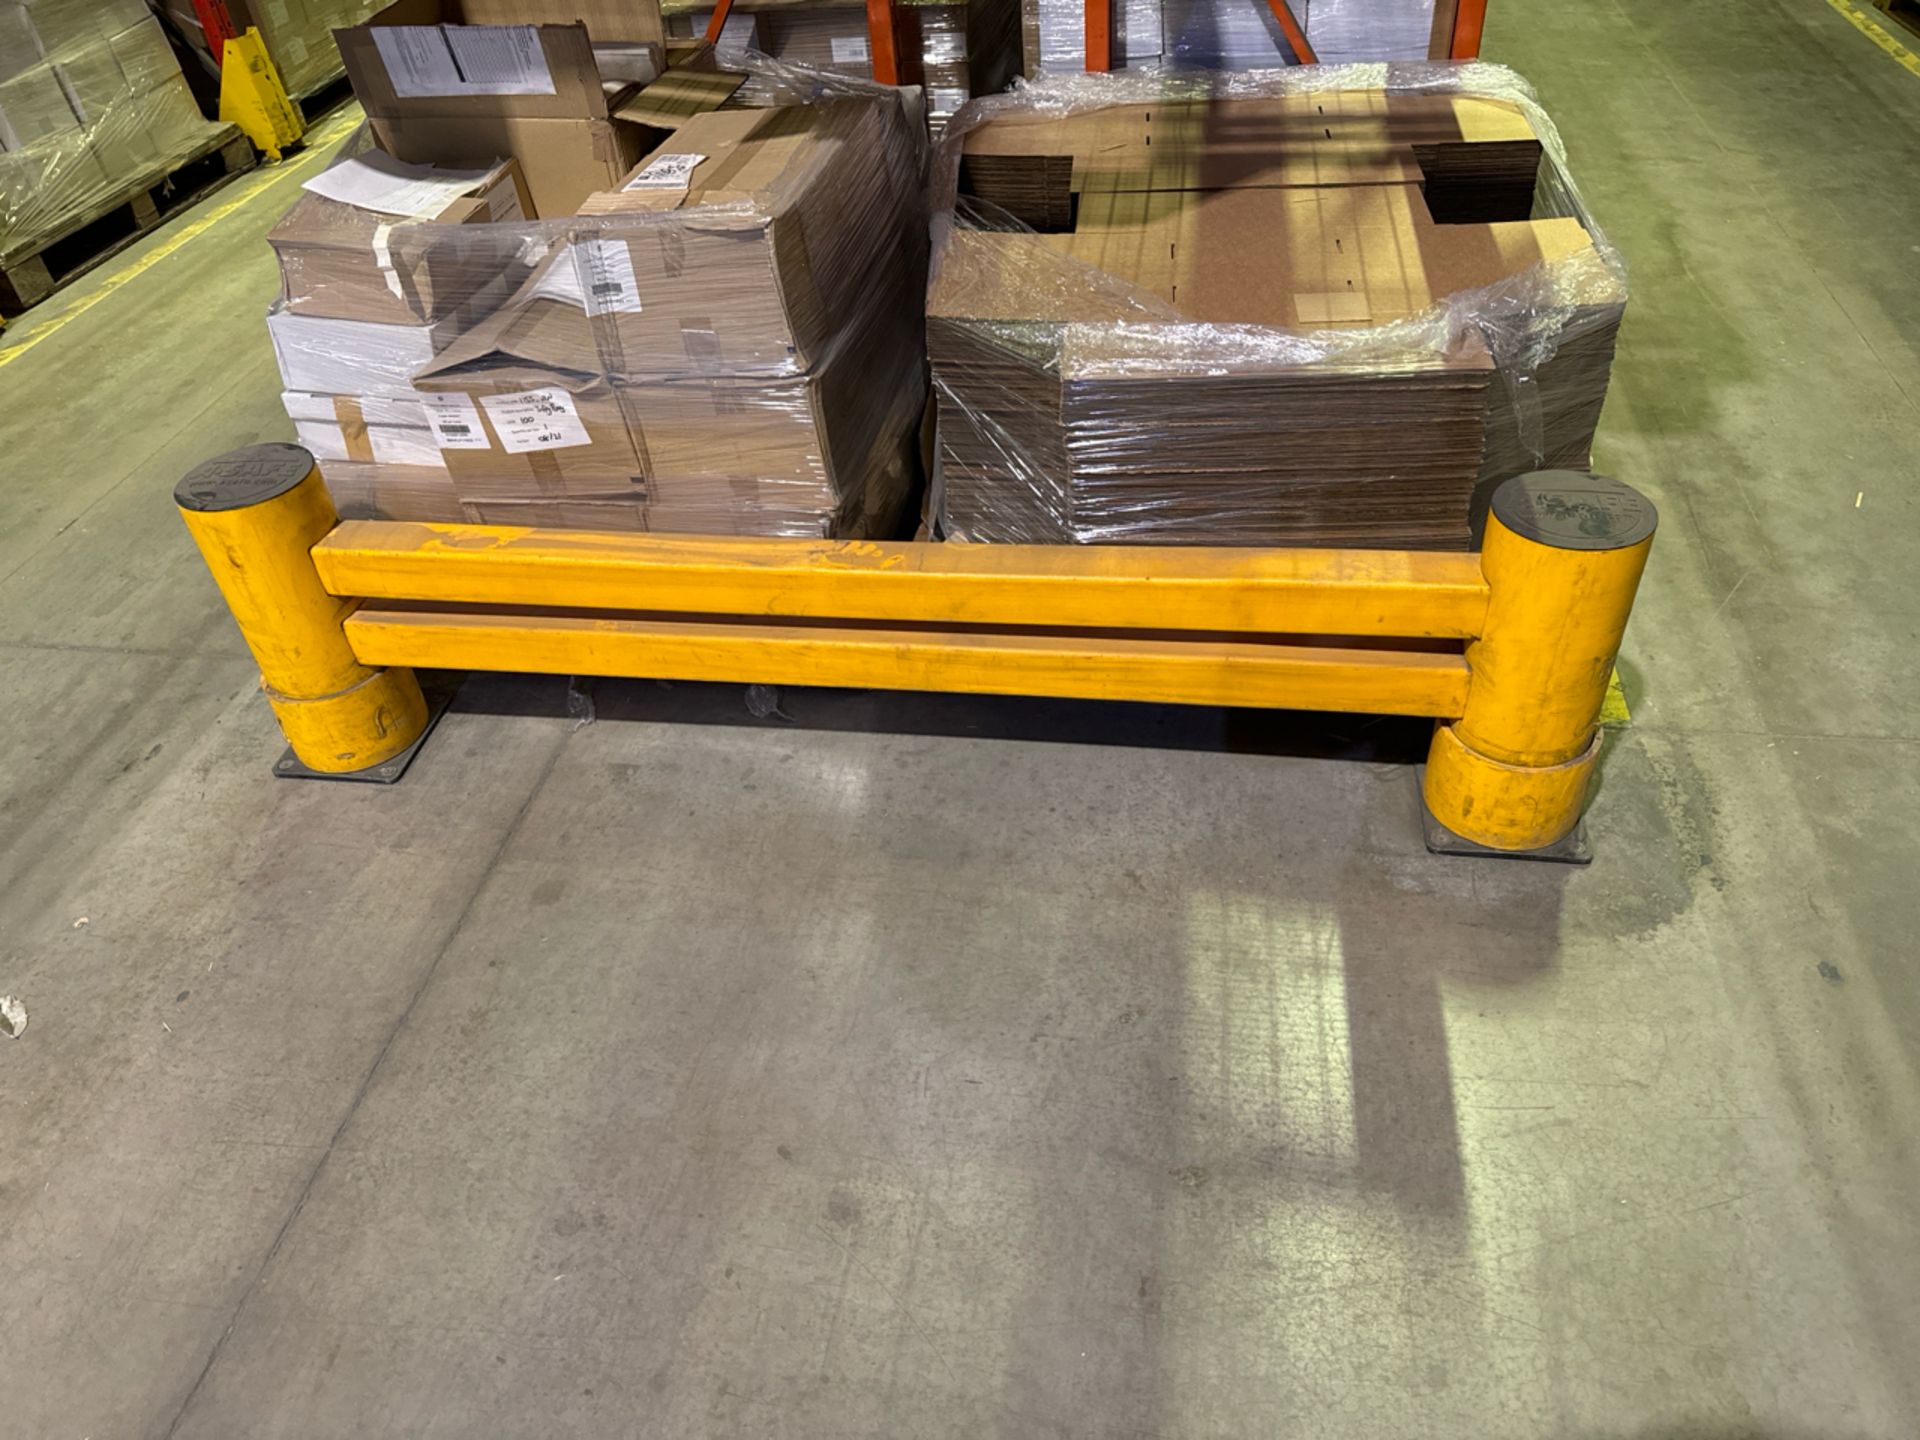 11 Bays Of Boltless Pallet Racking - Image 8 of 11